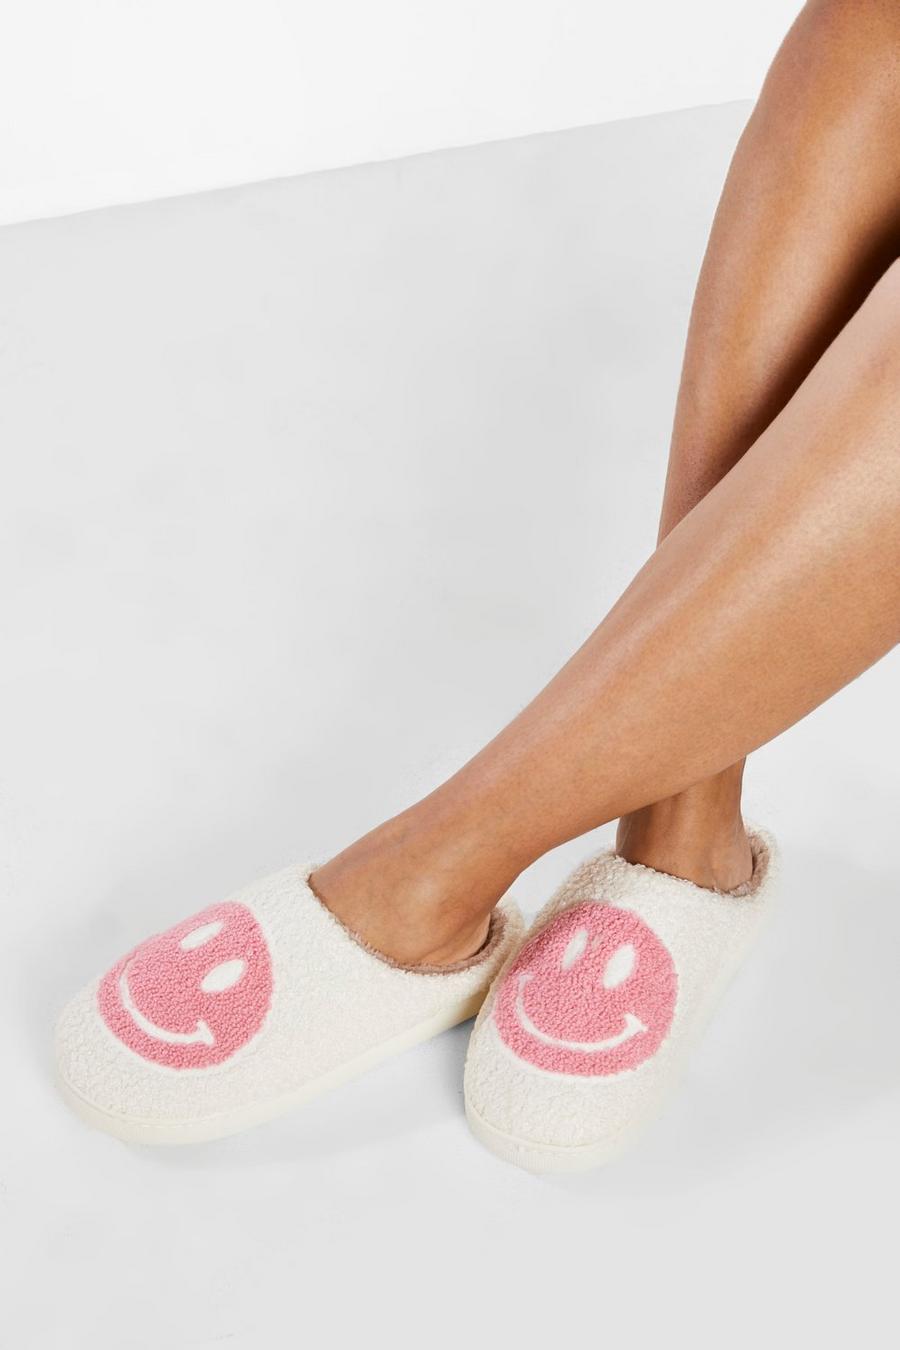 Chaussons smiley en polaire